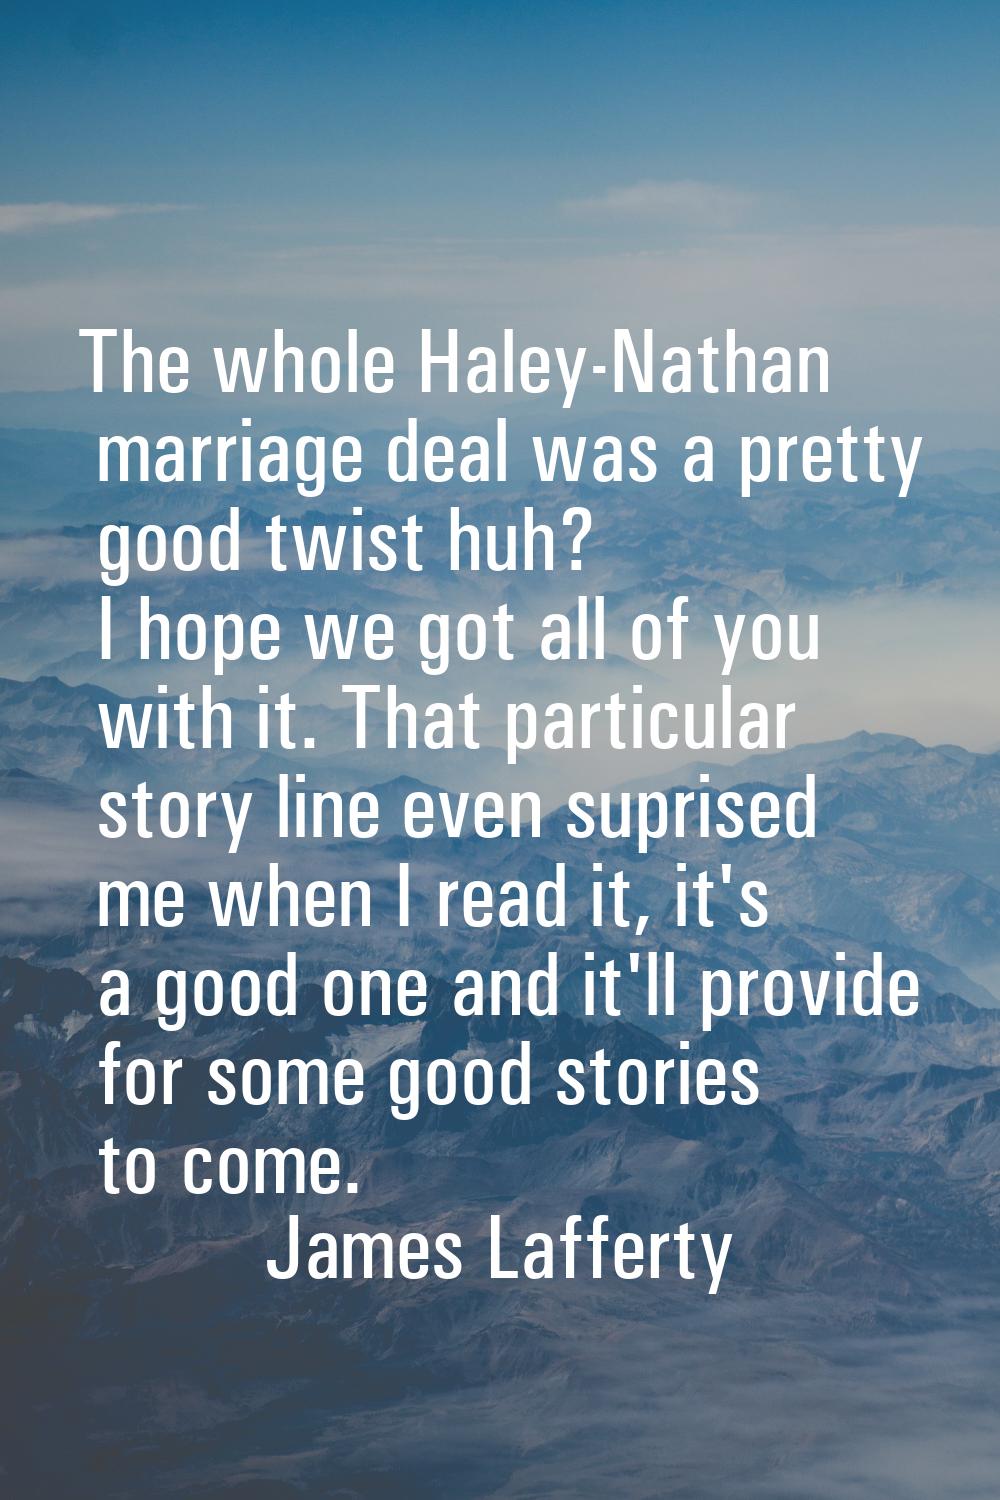 The whole Haley-Nathan marriage deal was a pretty good twist huh? I hope we got all of you with it.